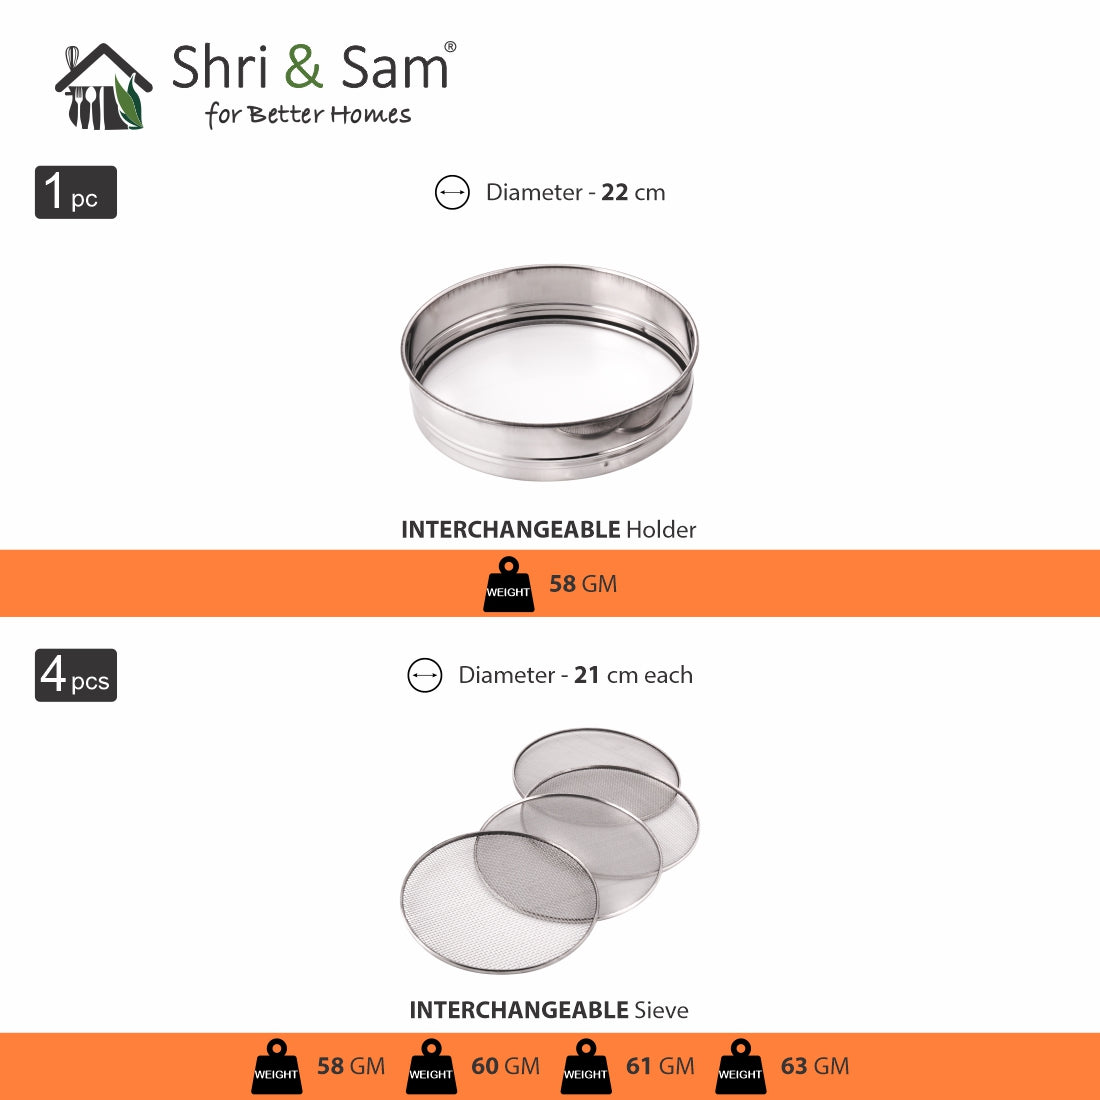 Stainless Steel Interchangeable Sieve Set with Holder